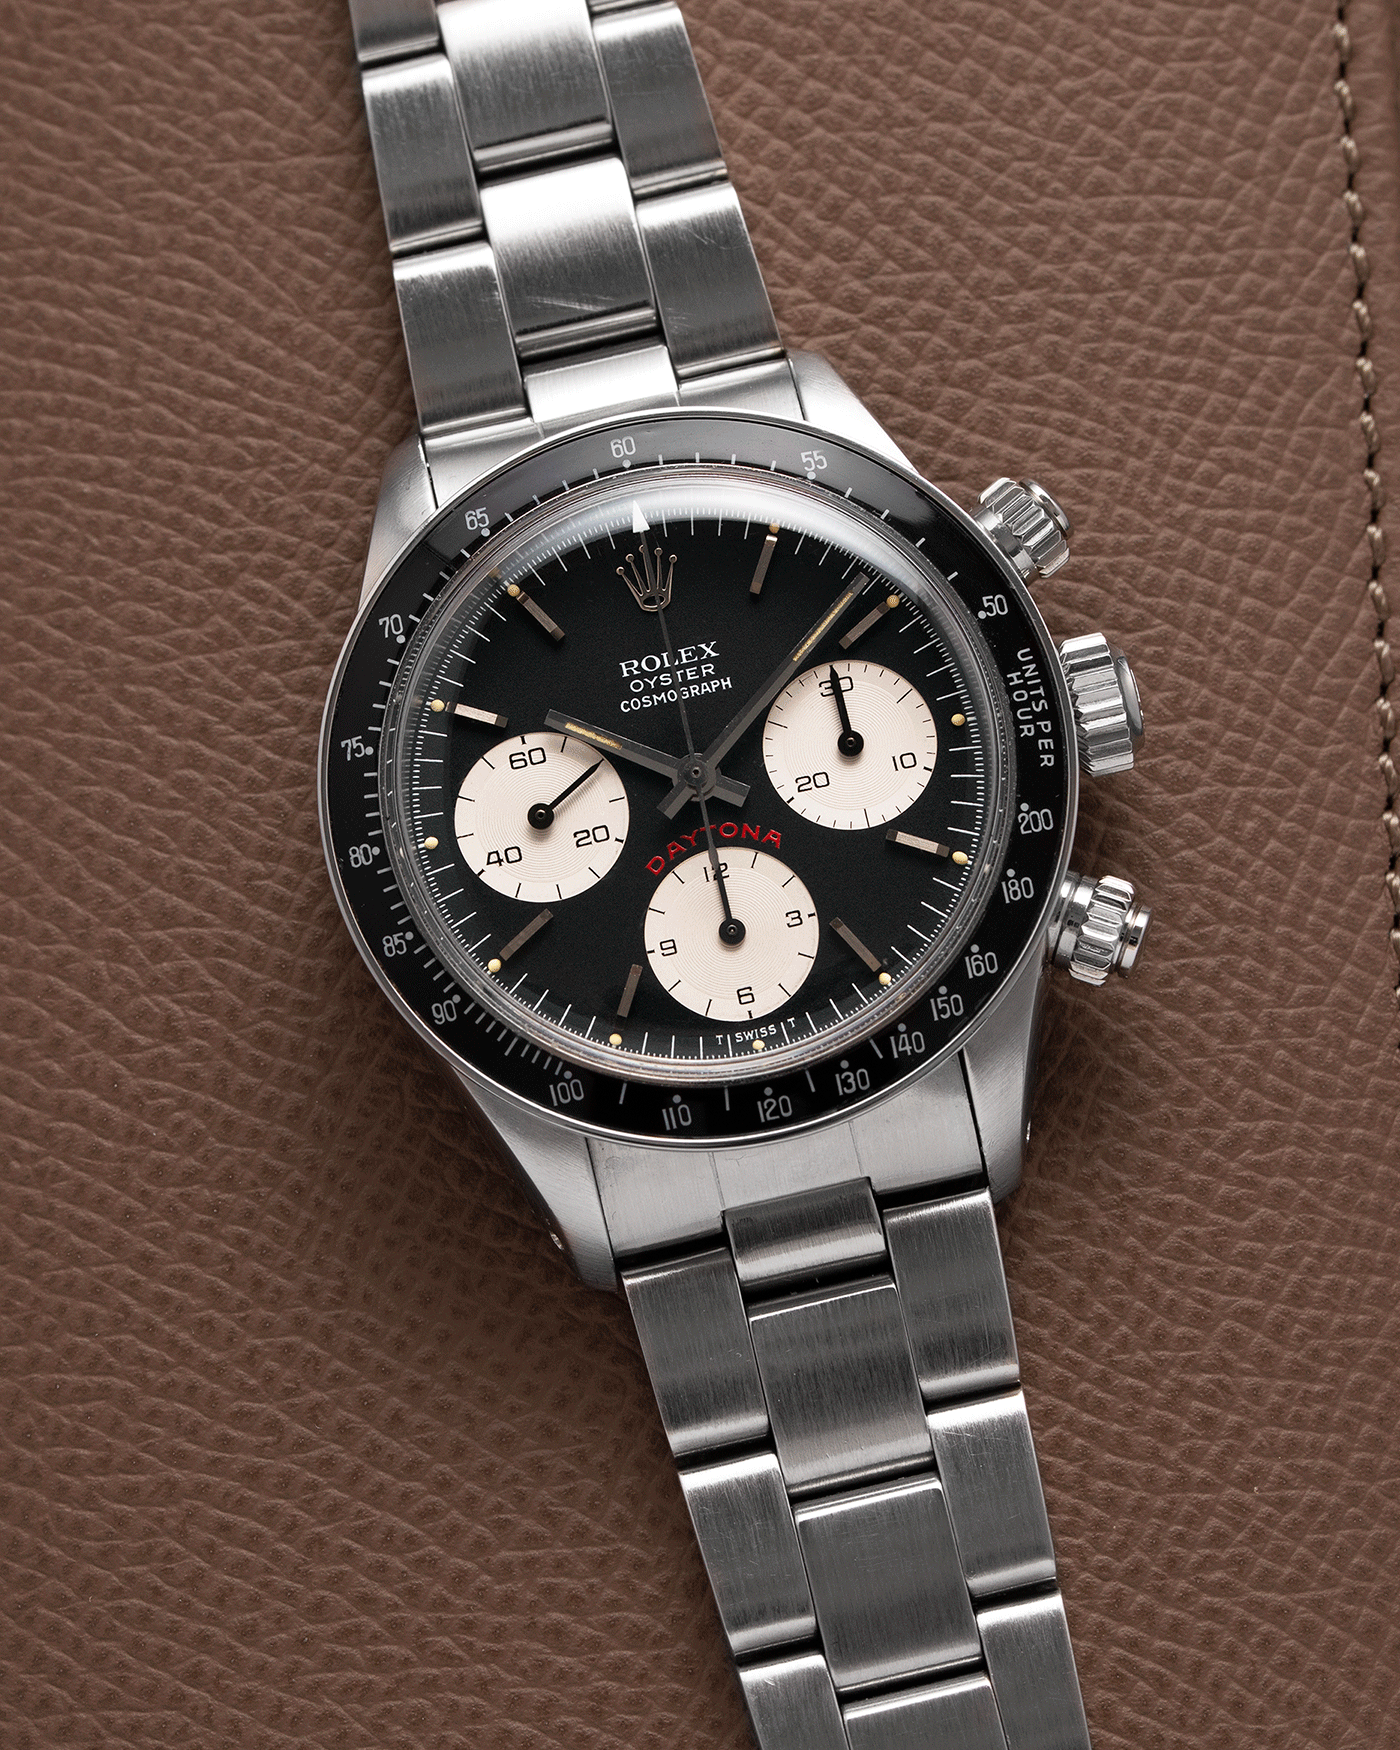 Brand: Rolex Year: 1979 Model: Cosmograph Daytona Reference Number: 6263 Serial Number: 5,8XX,XXX Material: Stainless Steel Movement: Valjoux 727 Case Diameter: 36mm Strap: Rolex 78350 Oyster Bracelet with 571 Endlinks